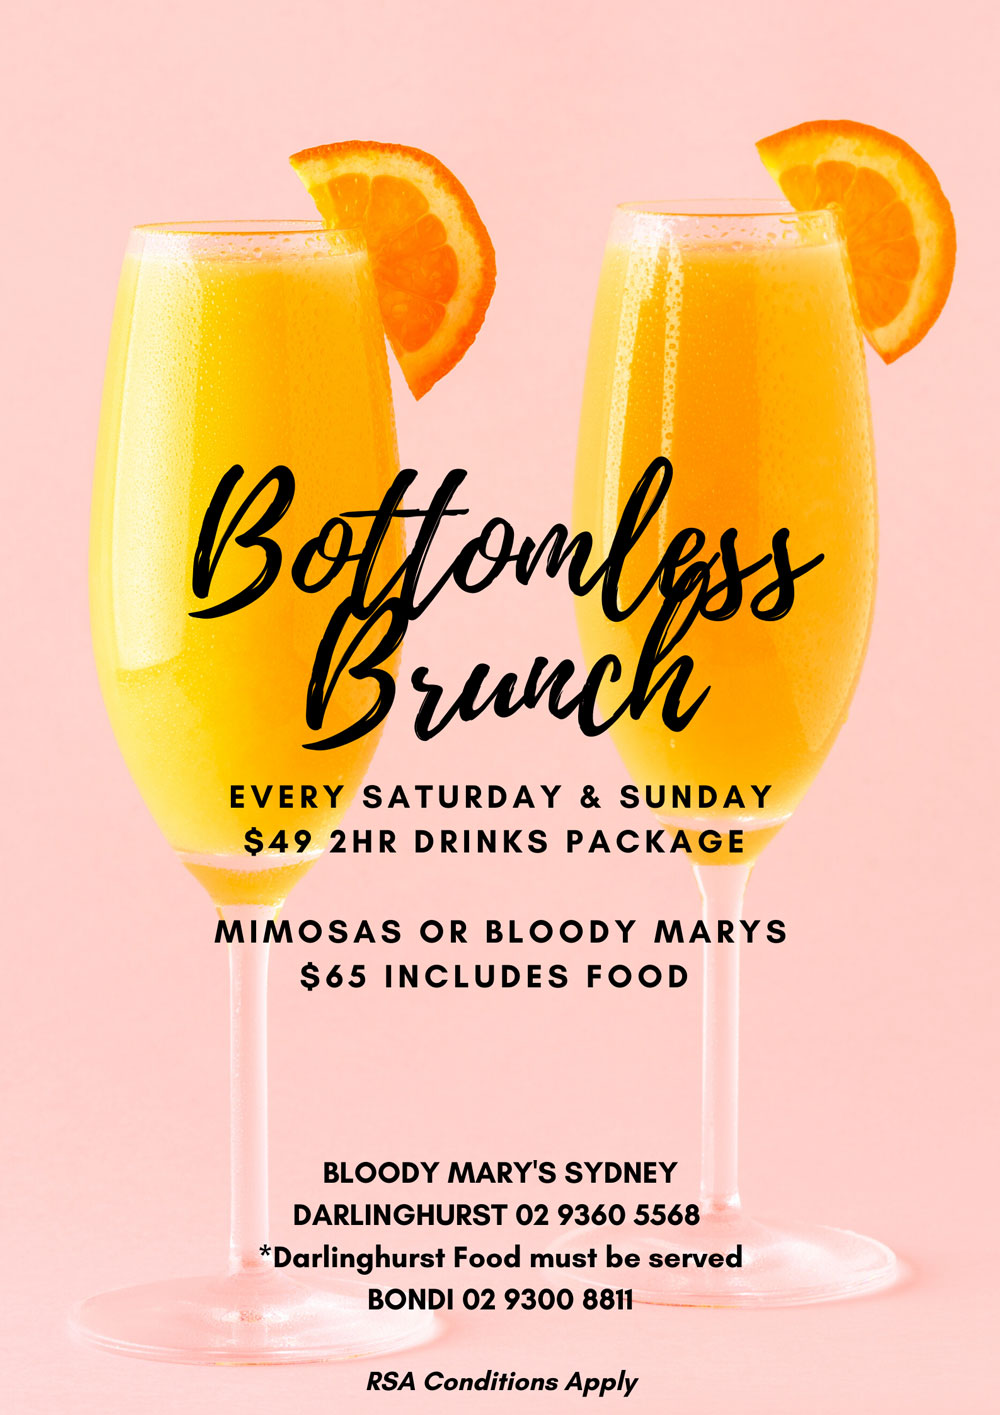 B Bottomless Brunch Bloody Mary's